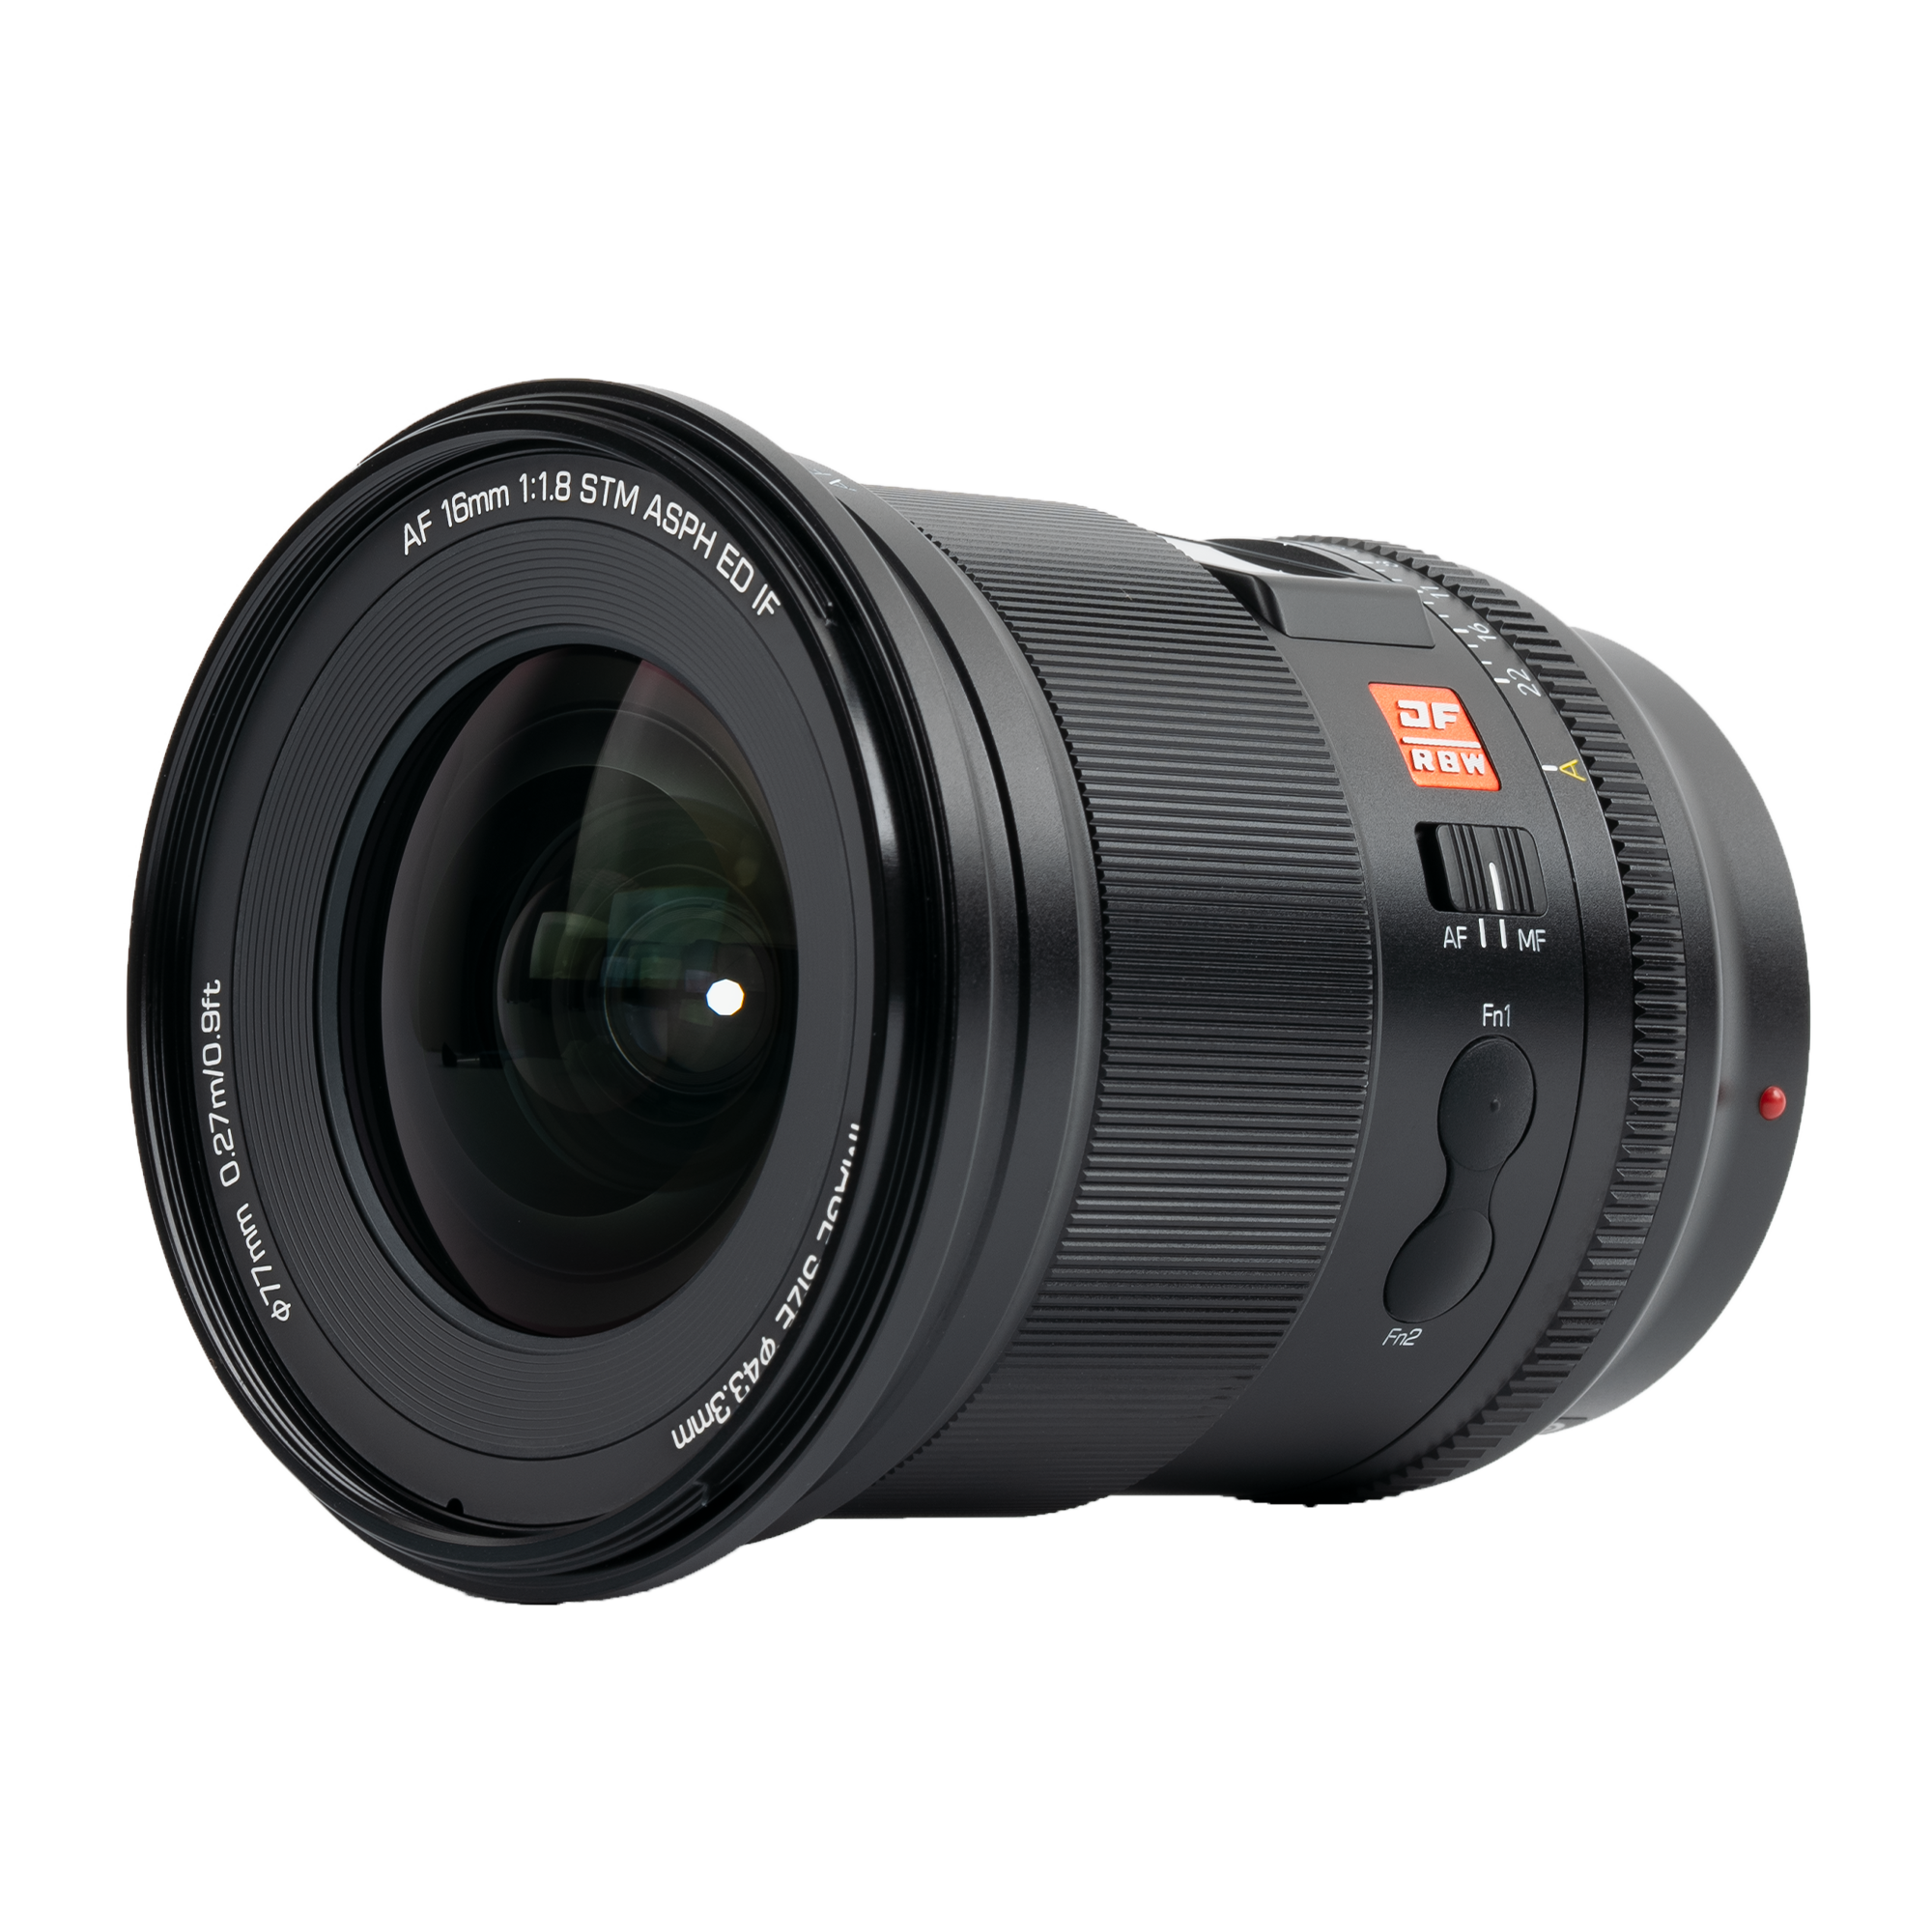 VILTROX AF 16mm f/1.8 FE Full Frame Lens for Sony E, Autofocus Lens with  Built-in LCD Screen, Large Aperture for Sony E-Mount a7